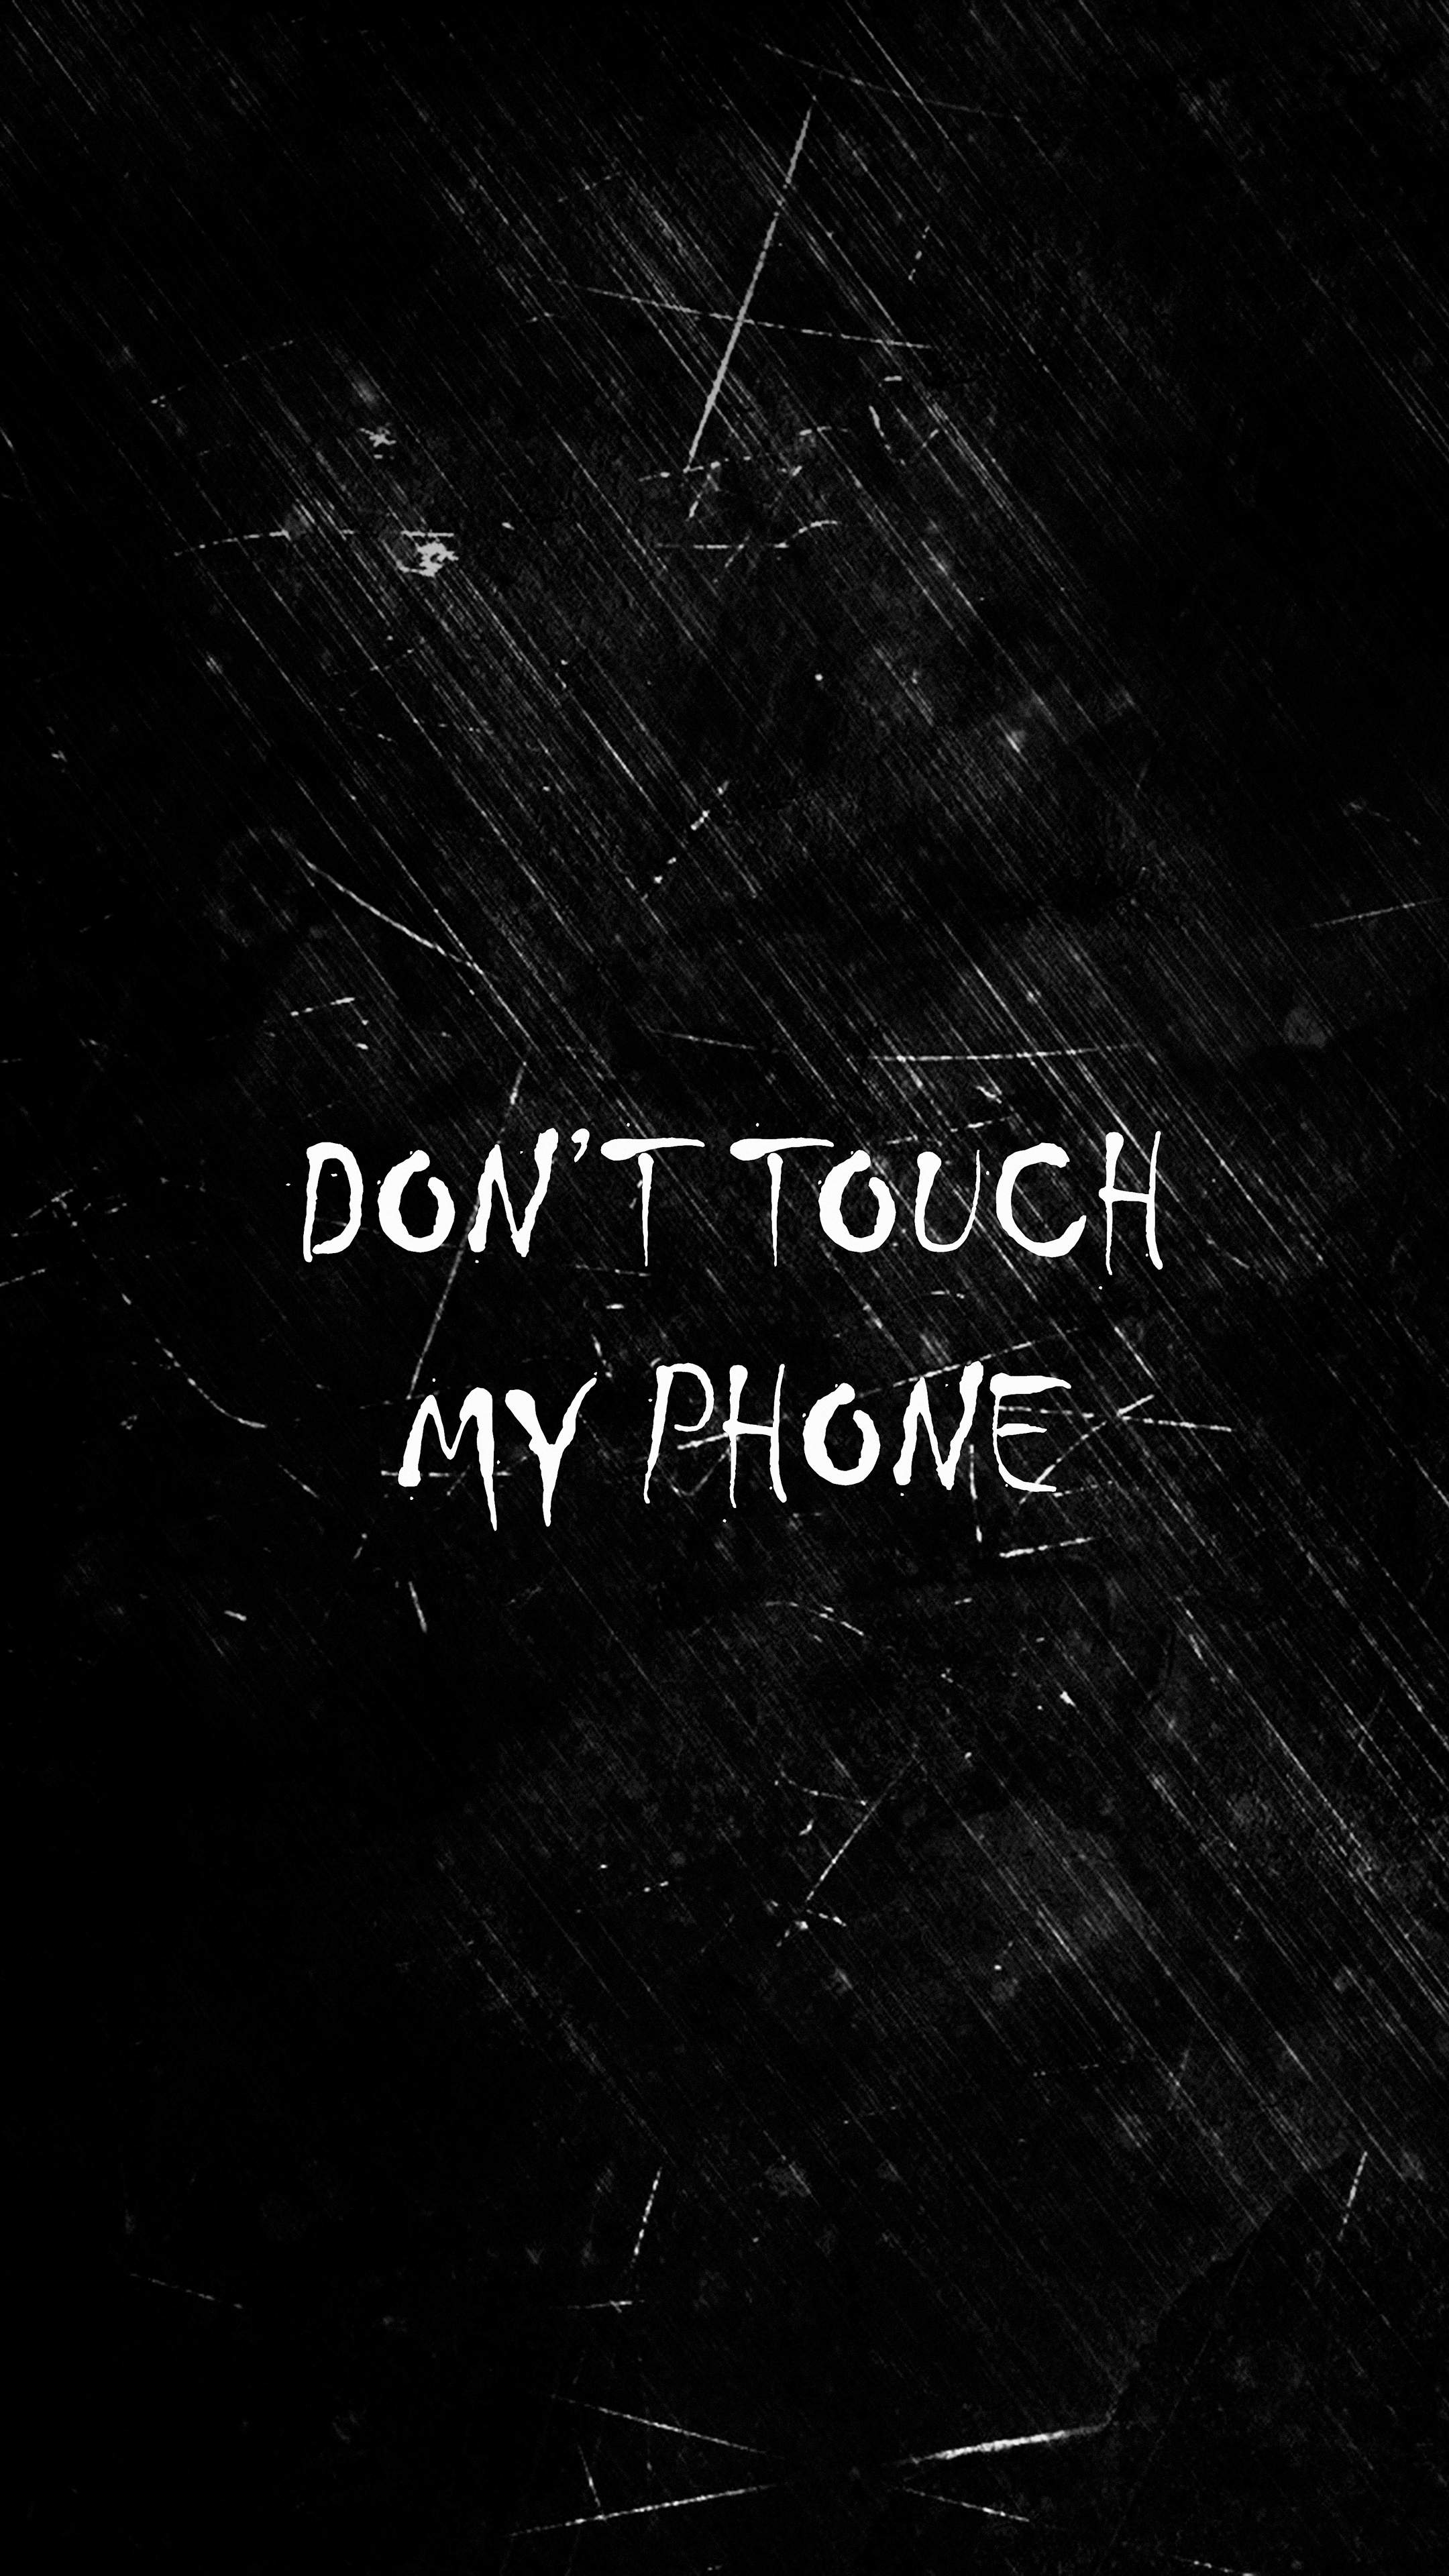 Amoled text Don't touch my phone